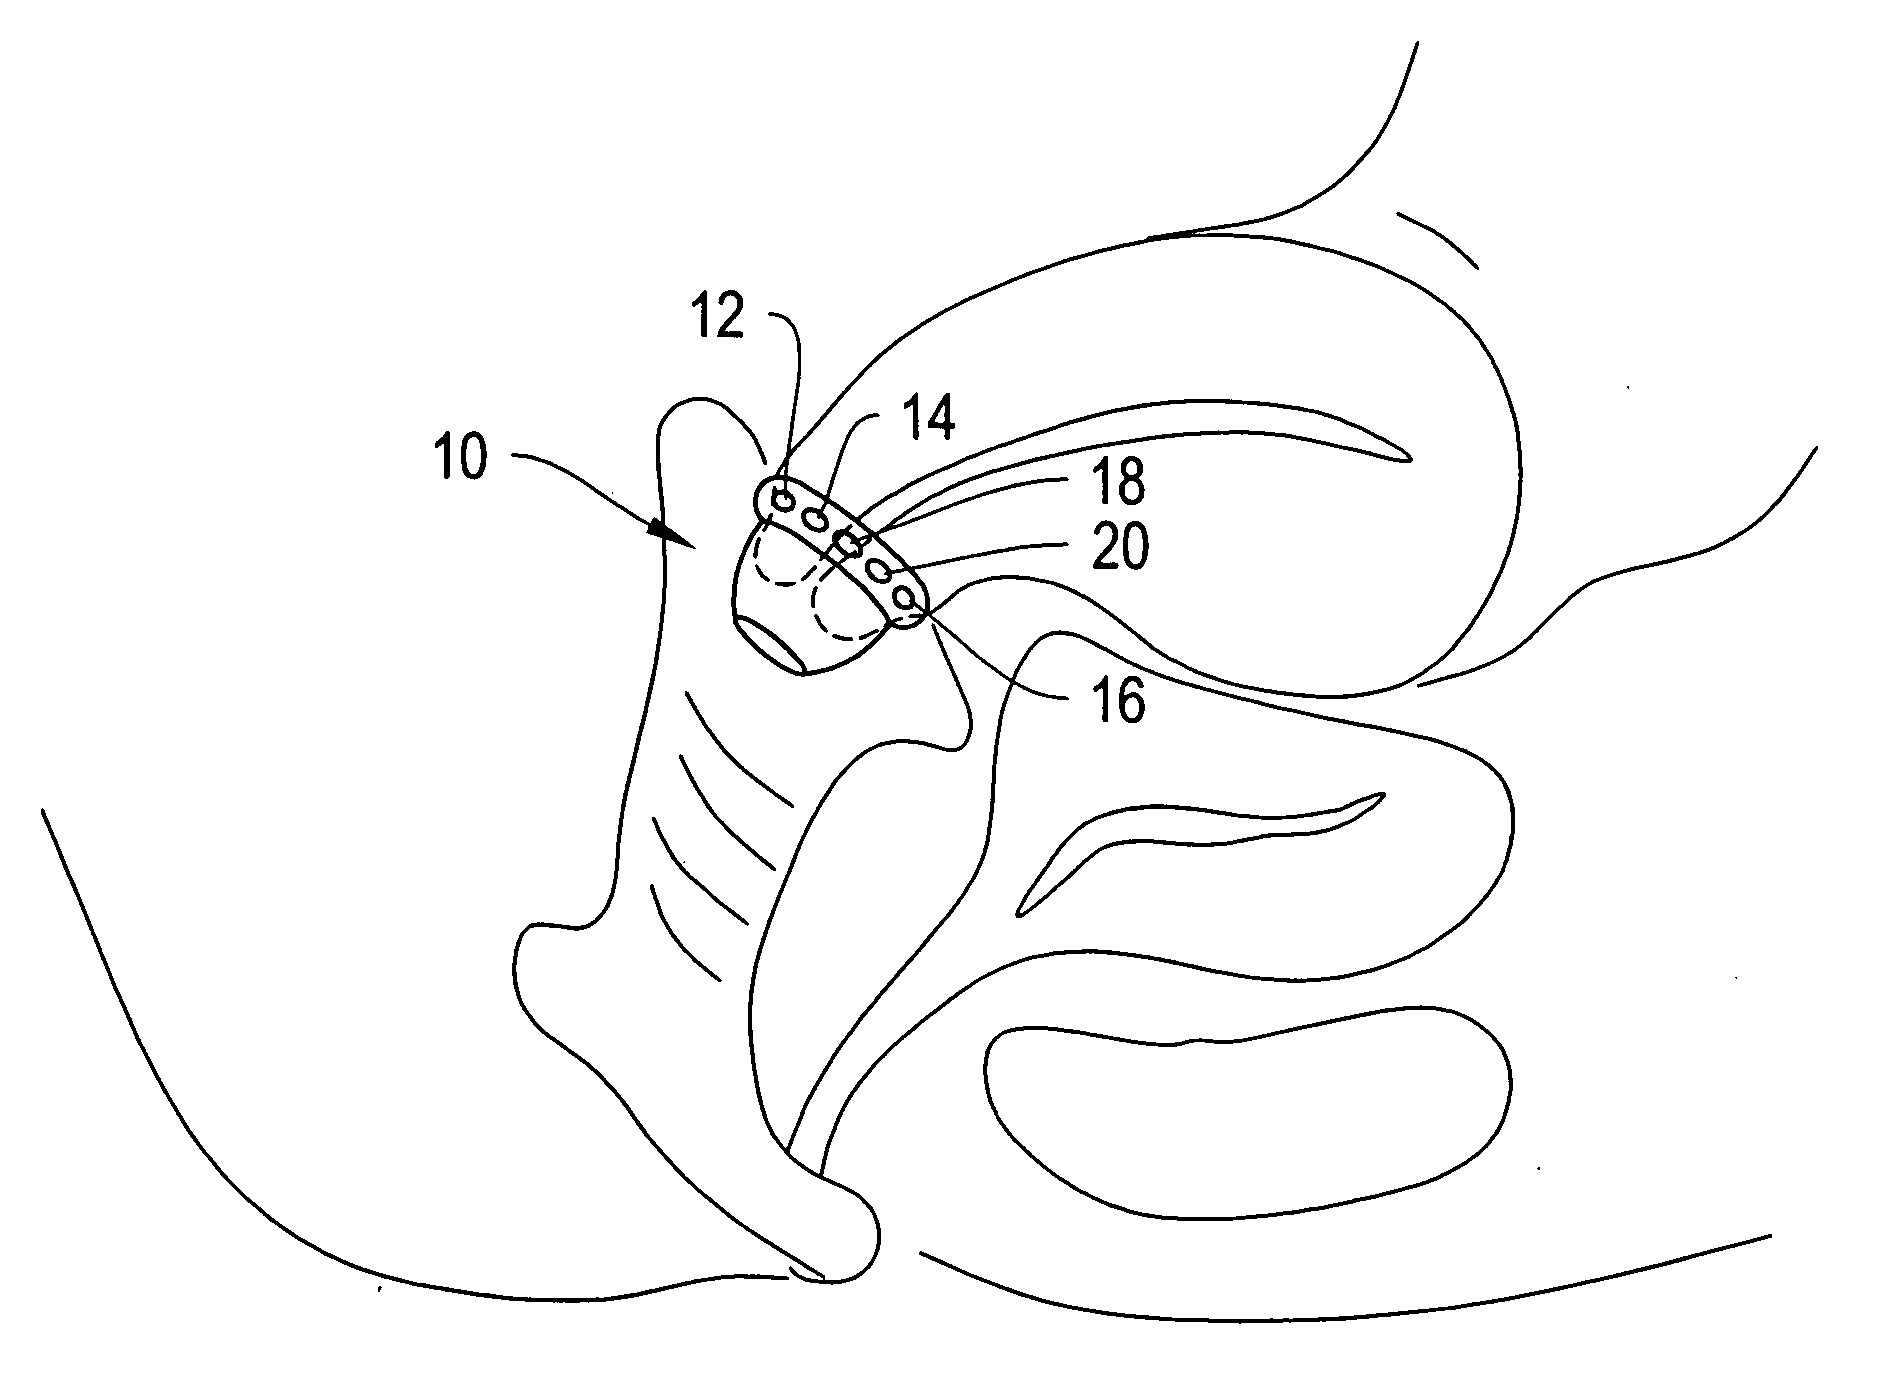 Systems and methods for a pregnancy monitoring device